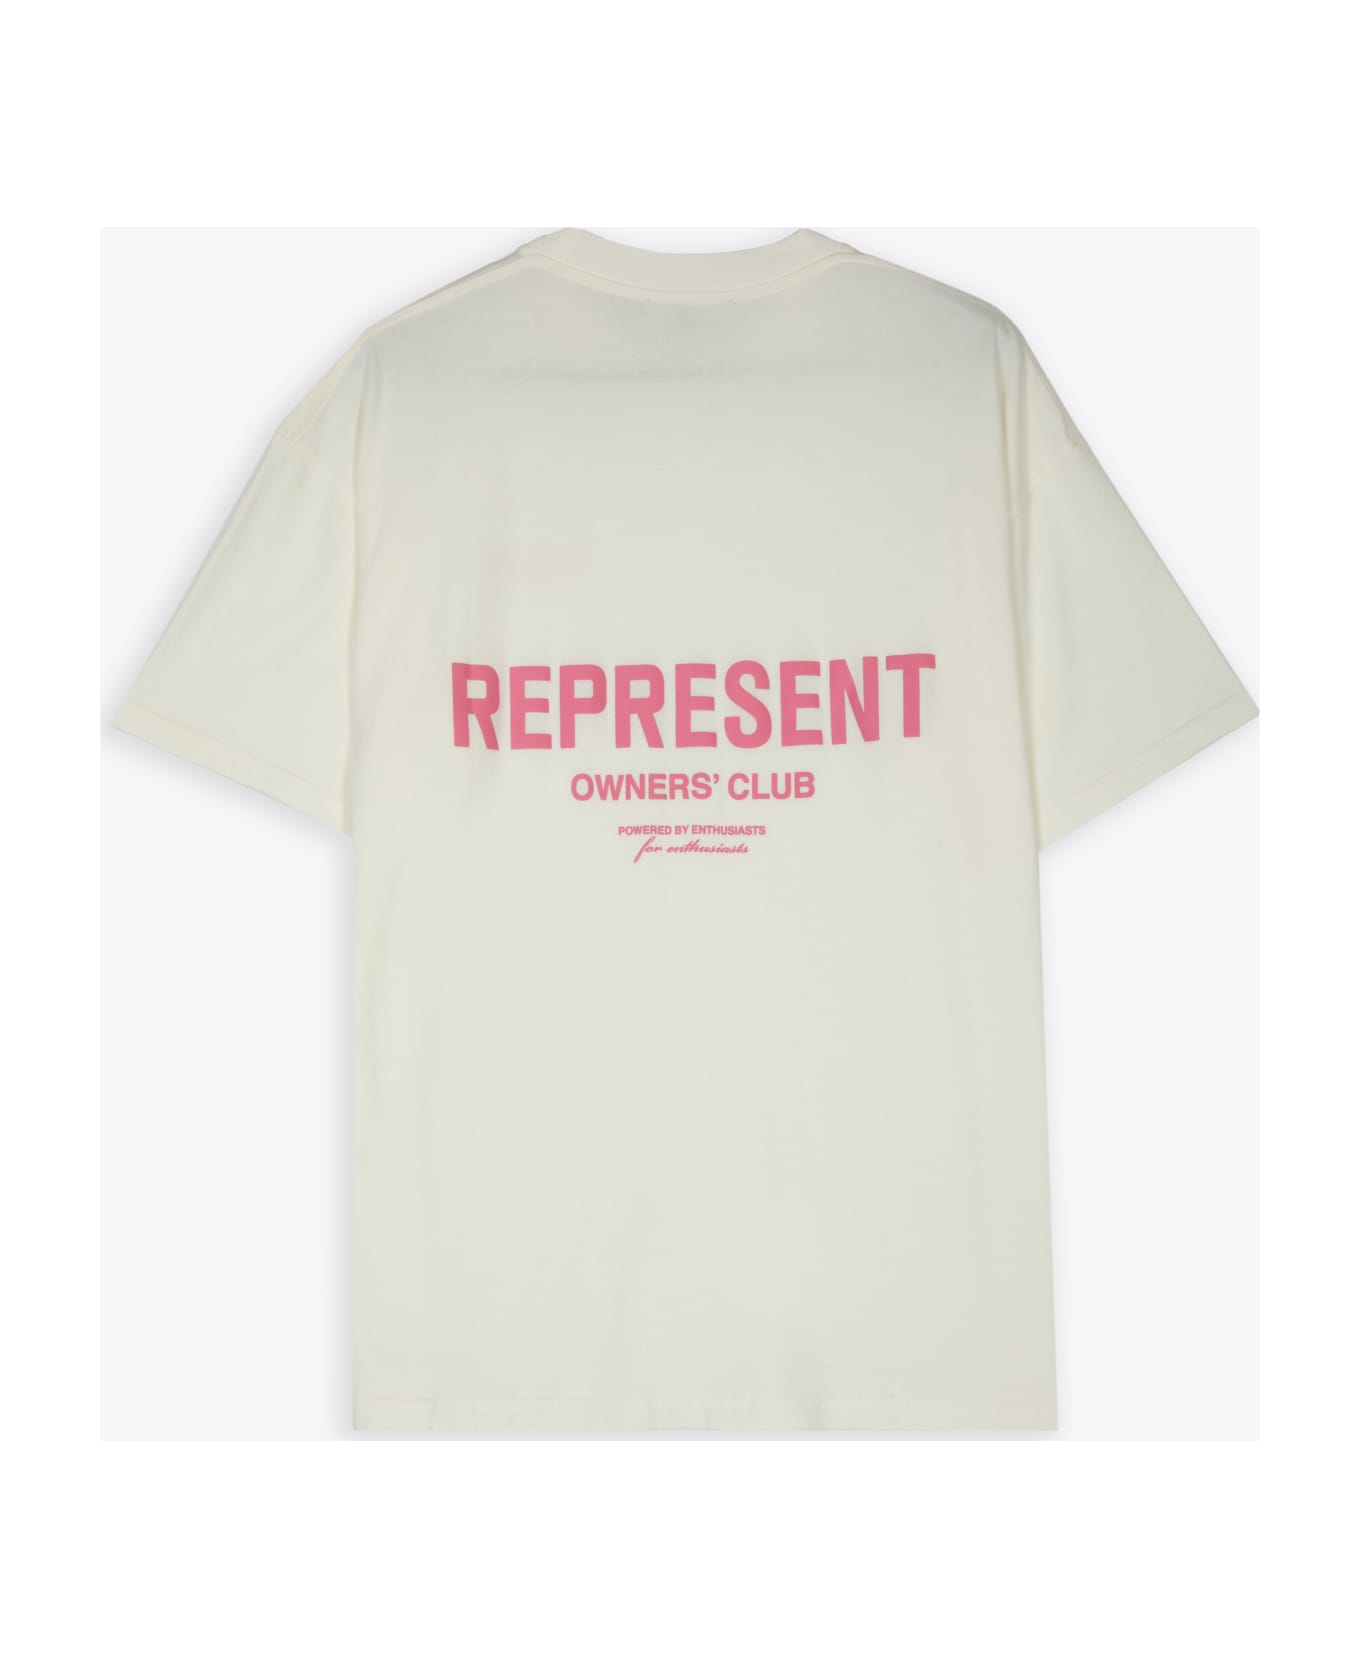 REPRESENT Owners Club T-shirt White cotton t-shirt with pink logo - Owners Club T-shirt - Bianco/rosa